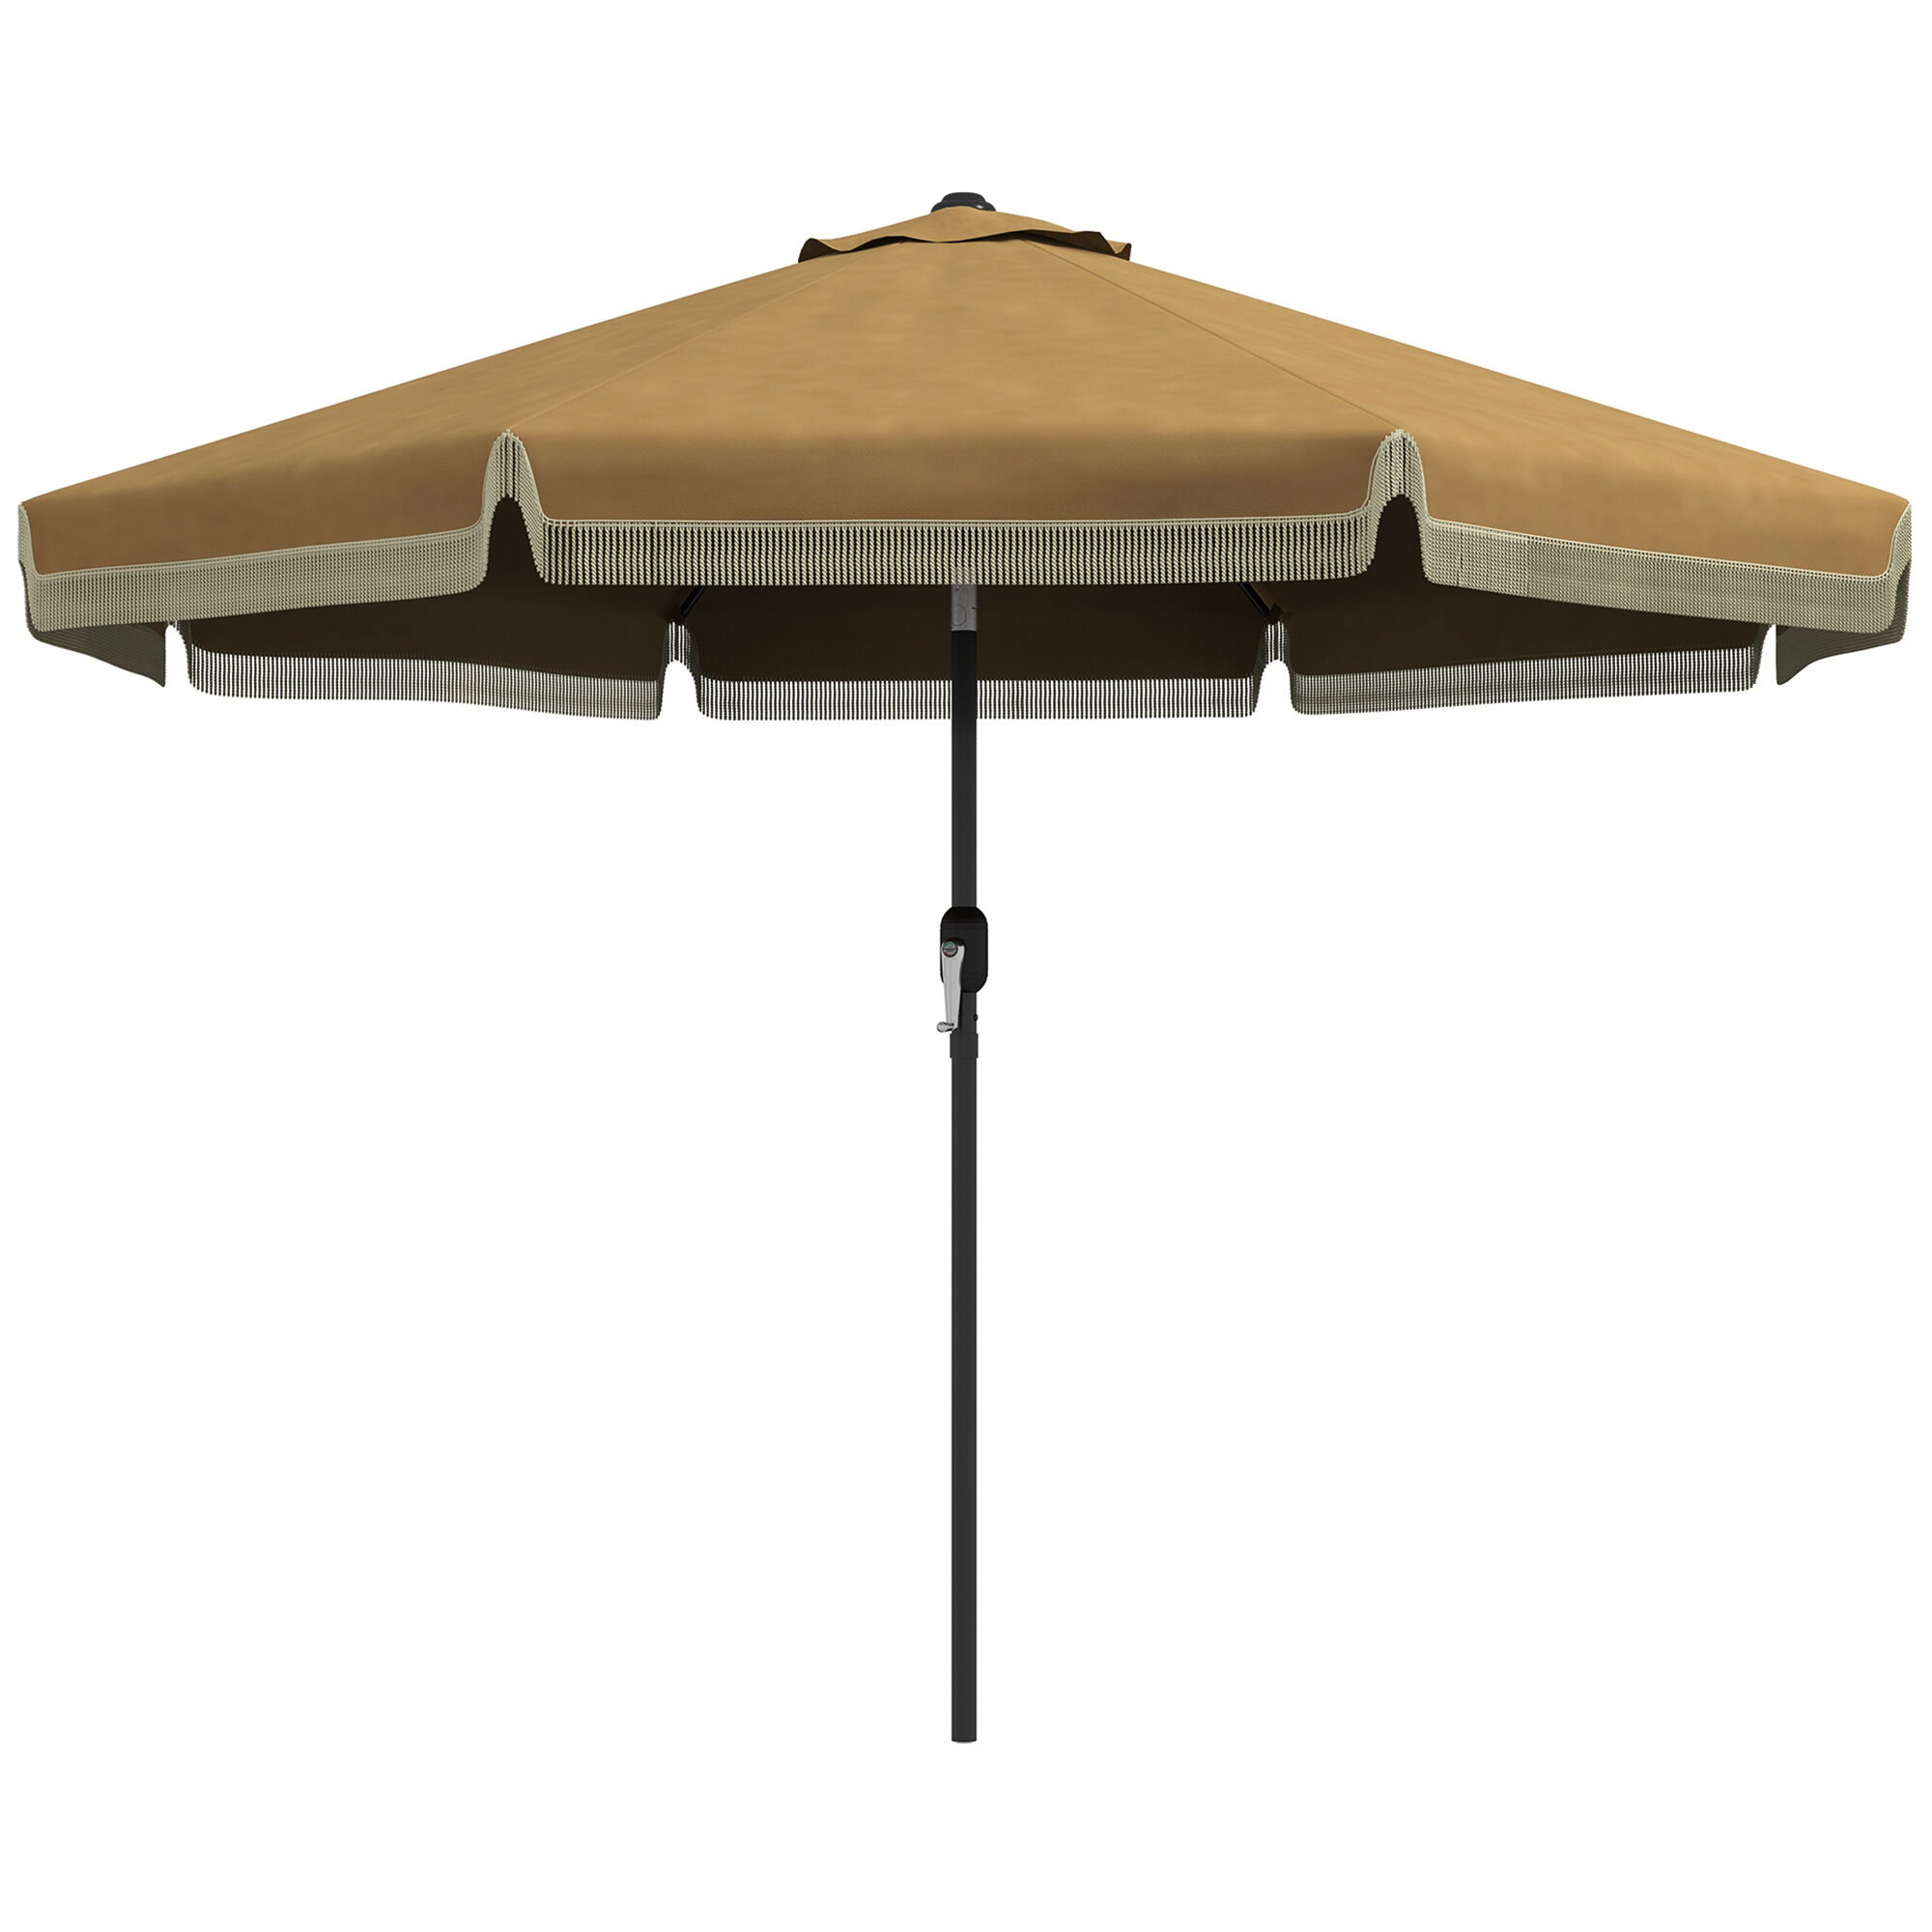 Outsunny 9’ Patio Umbrella with Push Button Tilt and Crank, Ruffled Outdoor Market Table Umbrella with Tassles and 8 Ribs, for Garden, Deck, Pool, Tan